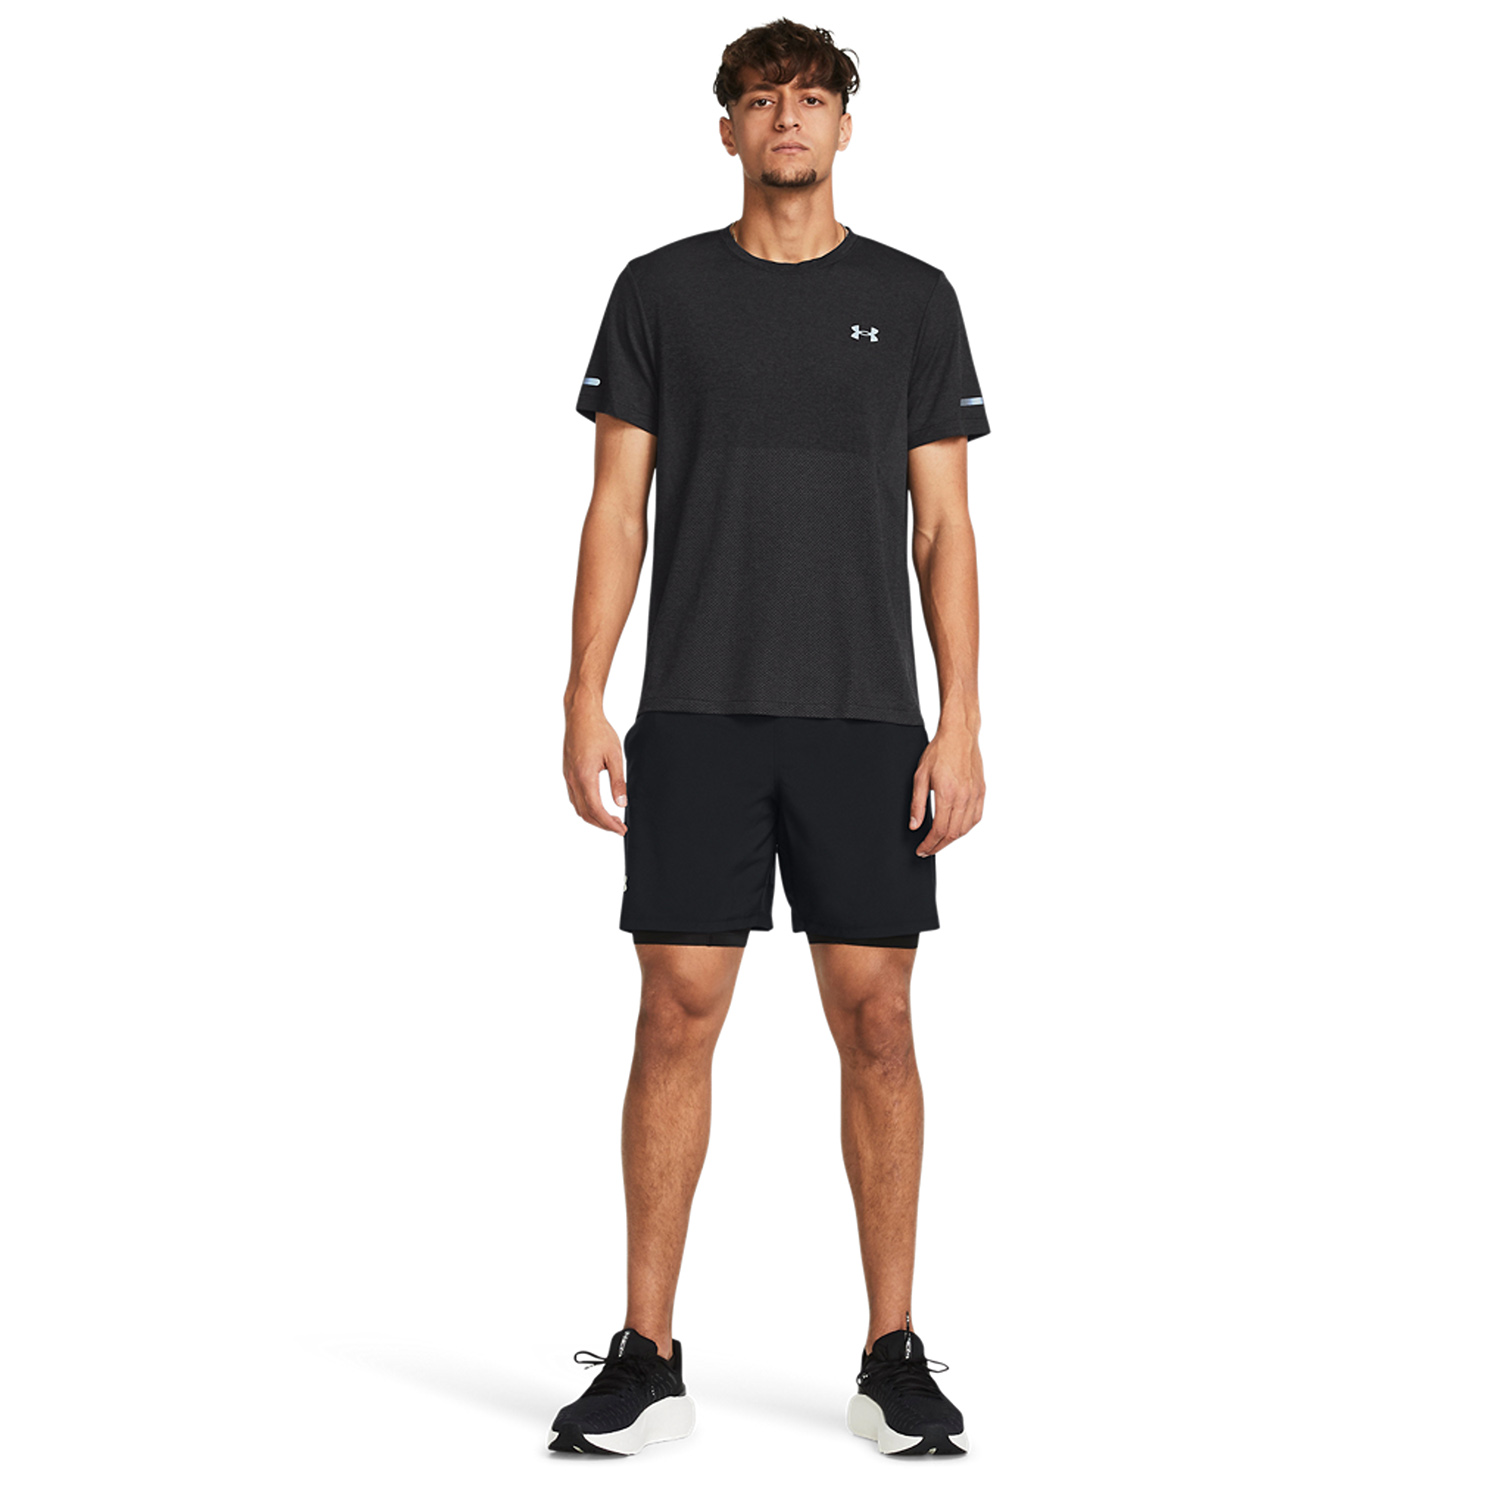 Under Armour Launch 7in 2 in 1 Shorts - Black/Reflective